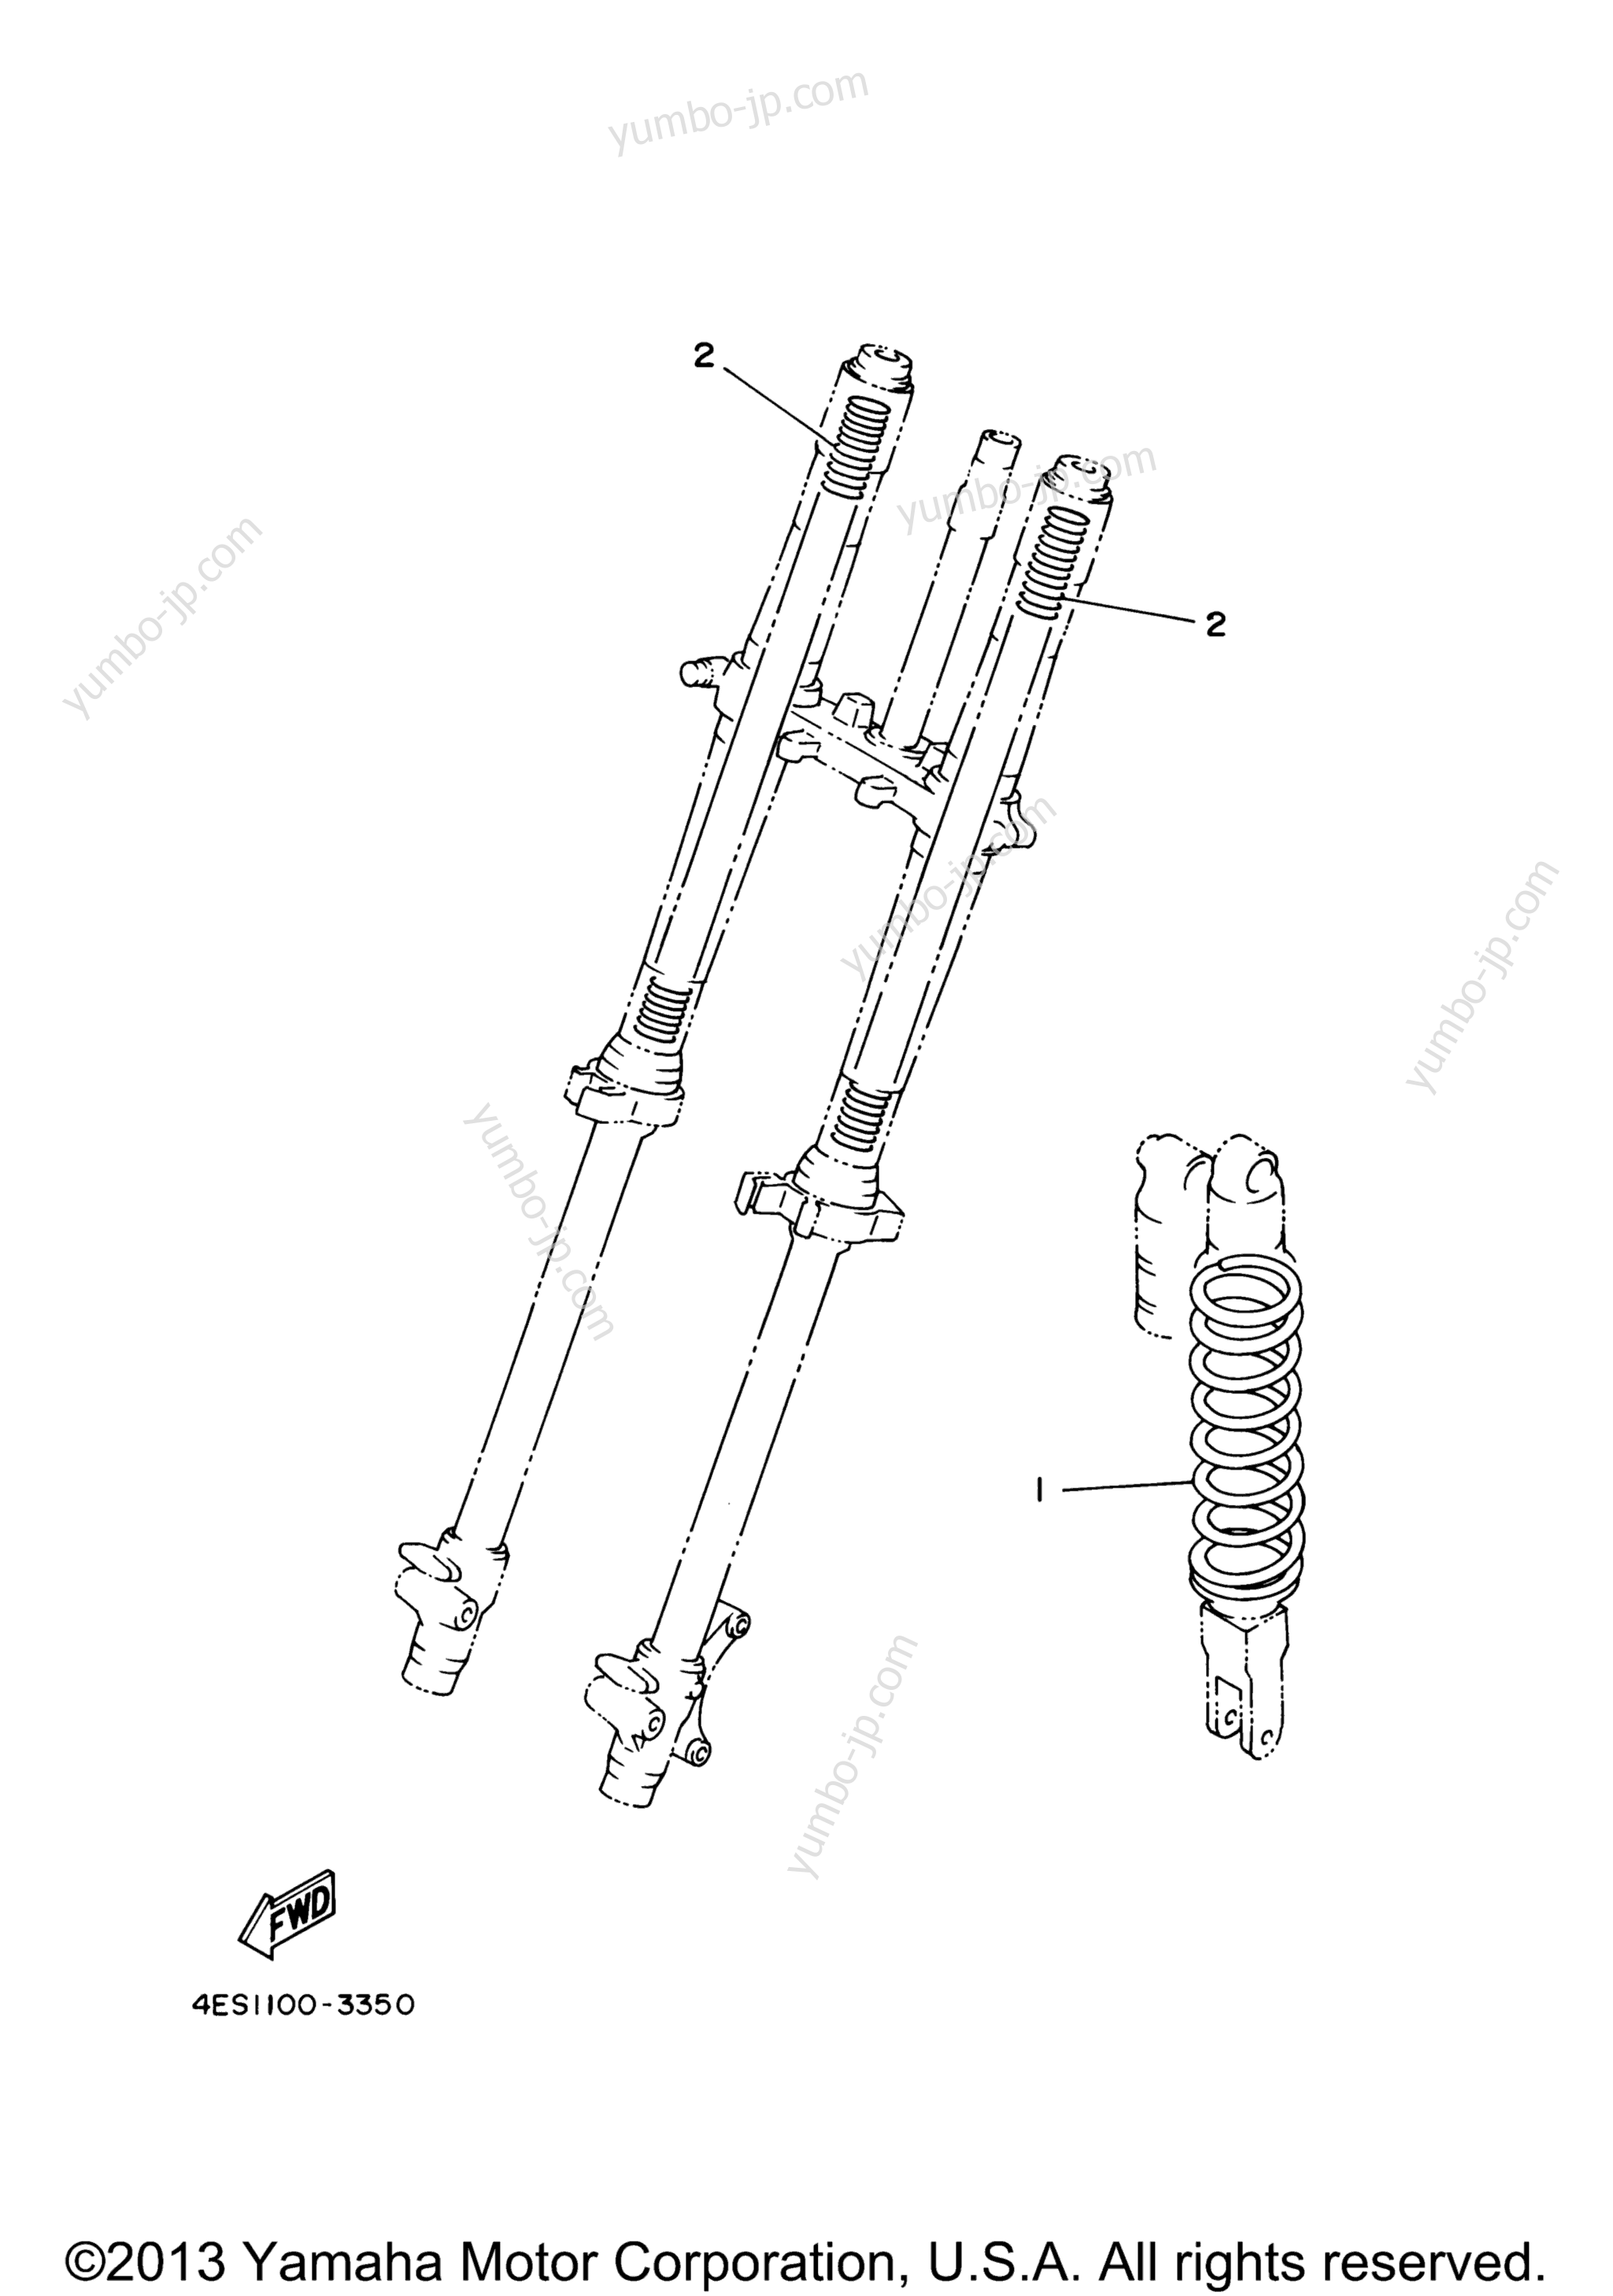 Alternate For Chassis for motorcycles YAMAHA YZ85 (YZ85X) 2008 year